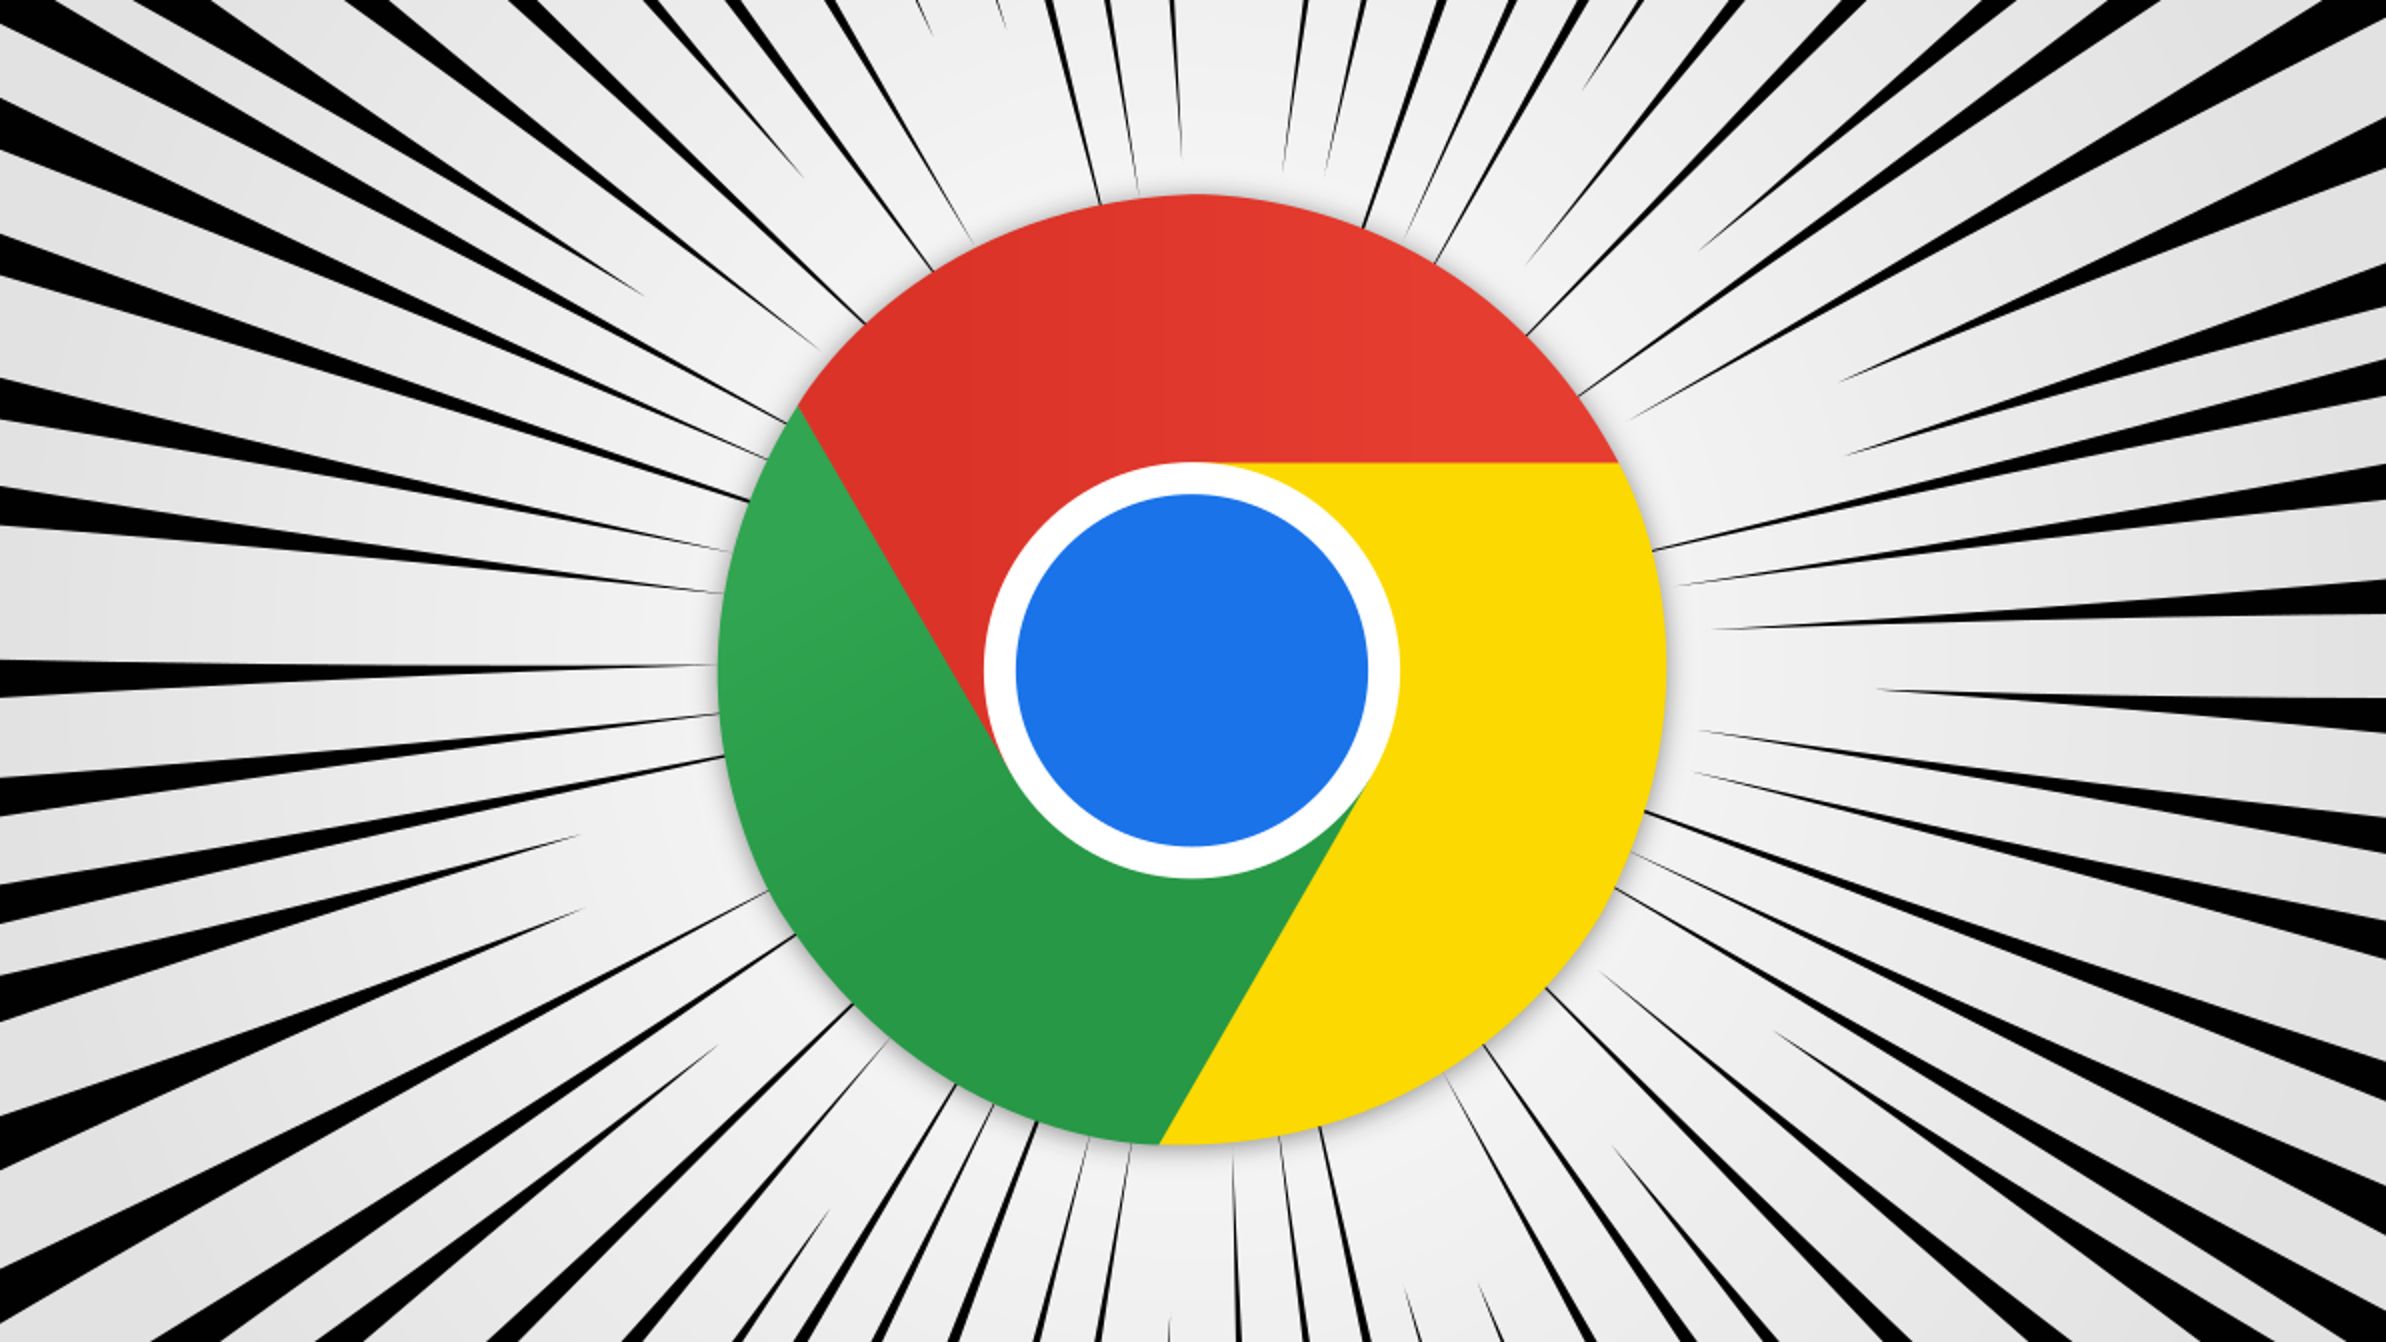 How To Add Websites To Google Chrome Most Visited